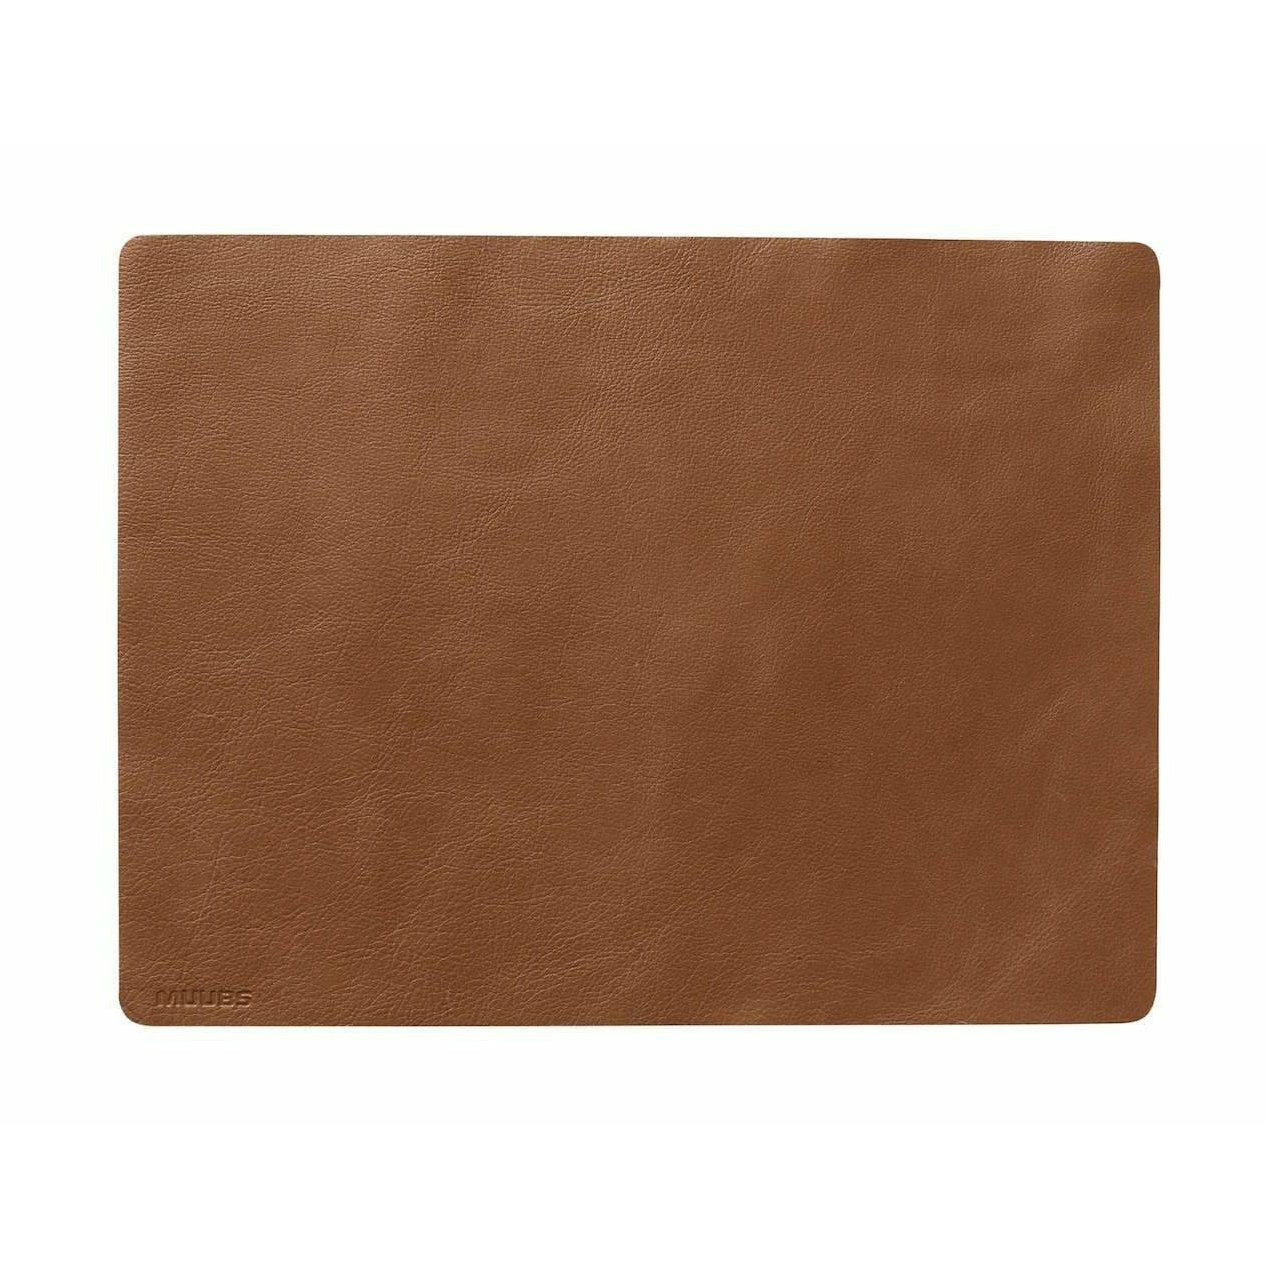 Muubs Camou Placemat 45cm, Brown Leather